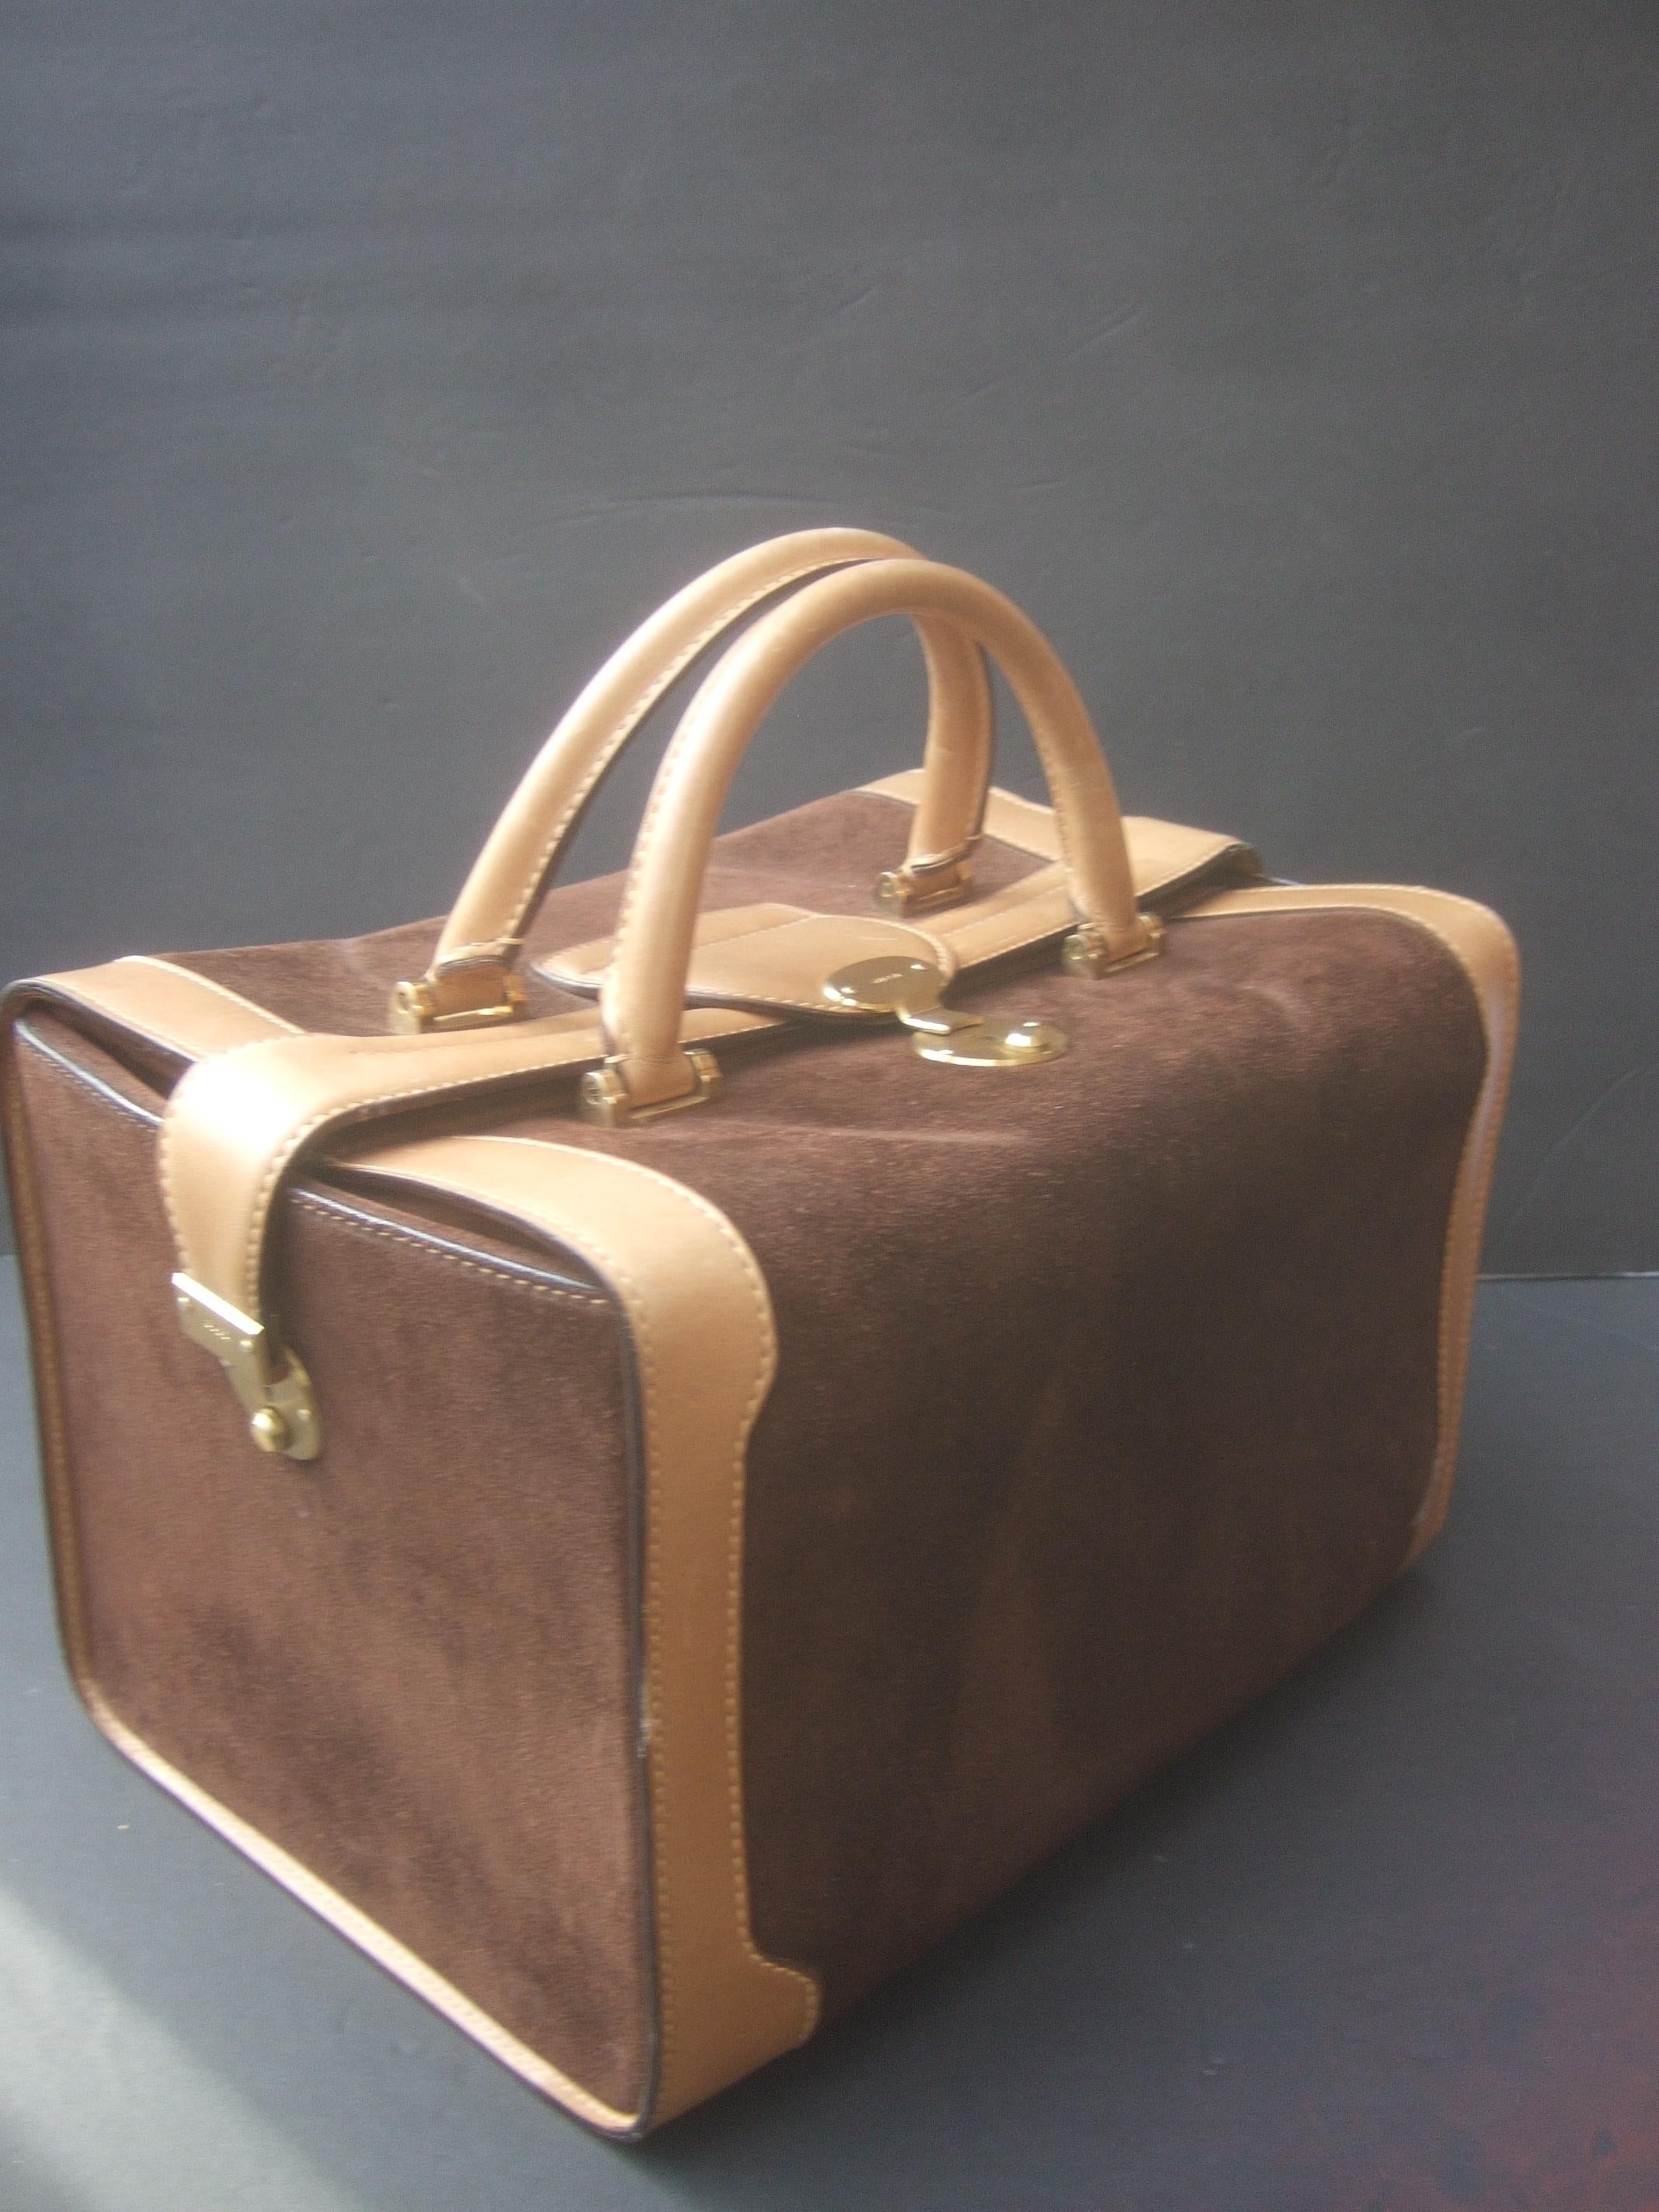 Gucci Italy Rare chocolate brown suede leather trim train case c 1970s
The luxurious Italian travel case is covered with plush dark brown suede
Framed with smooth caramel brown leather trim with subtle saddle stitching 

Carried with matching light